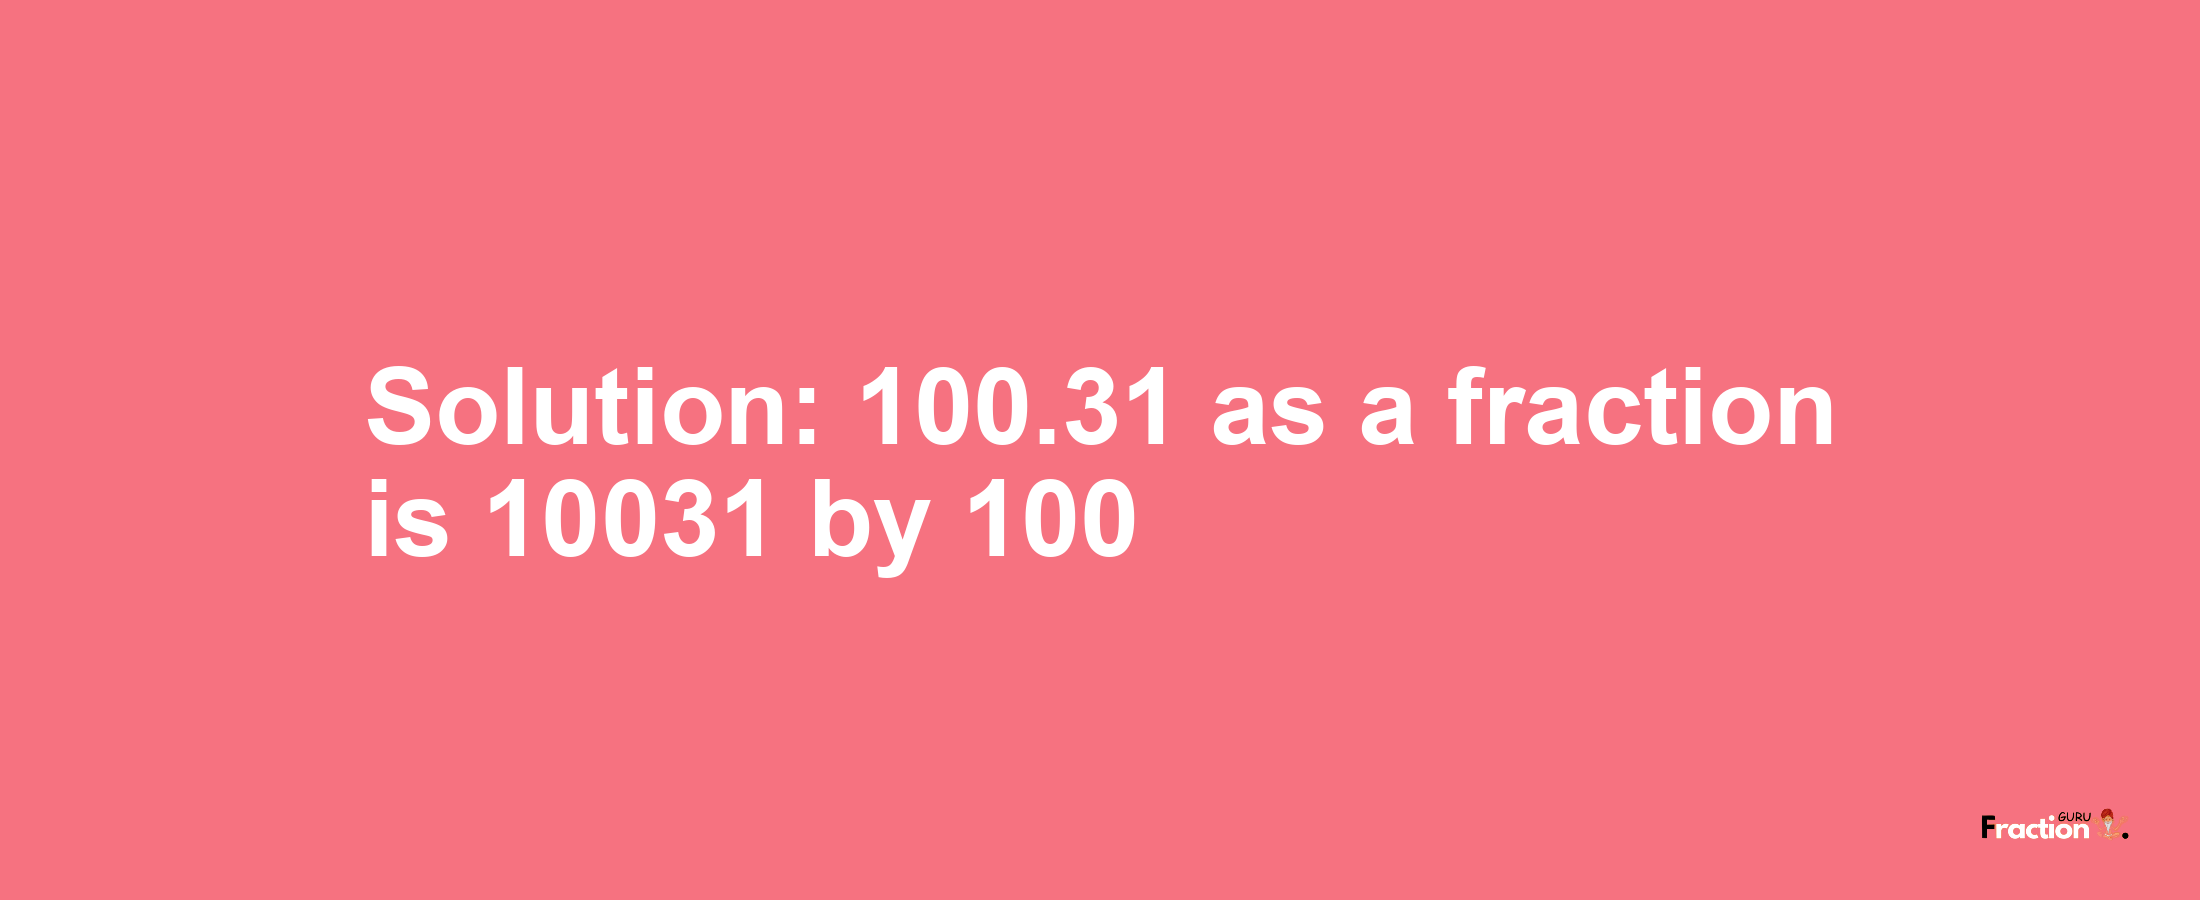 Solution:100.31 as a fraction is 10031/100